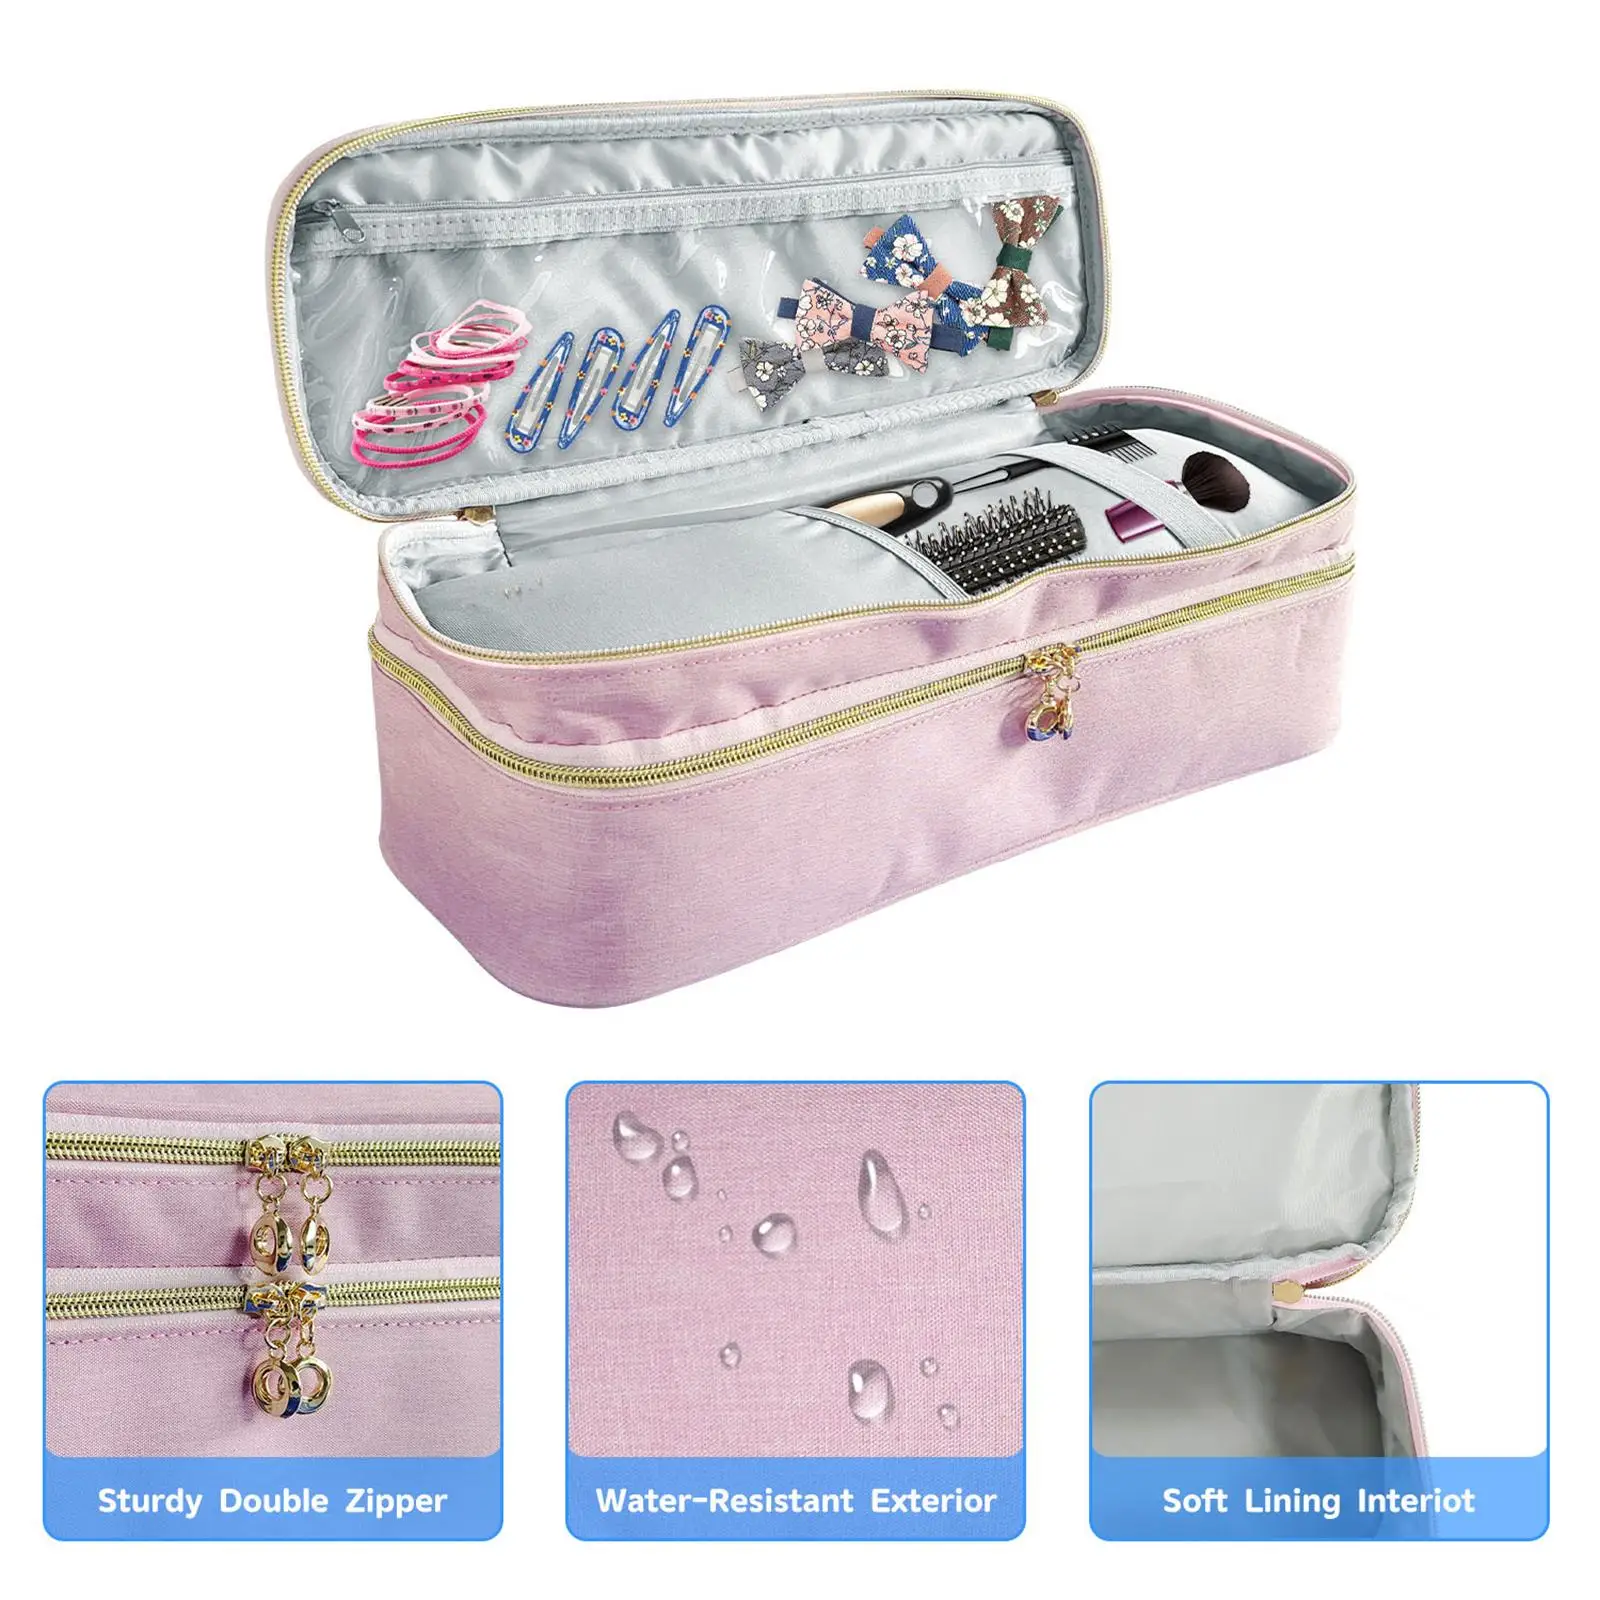 Hair Dryer Bags Styling Tools Storage Bathroom Travel Case Bag Oxford Cloth Large Makeup Case Toiletry Bag Hair Dryer Organizer